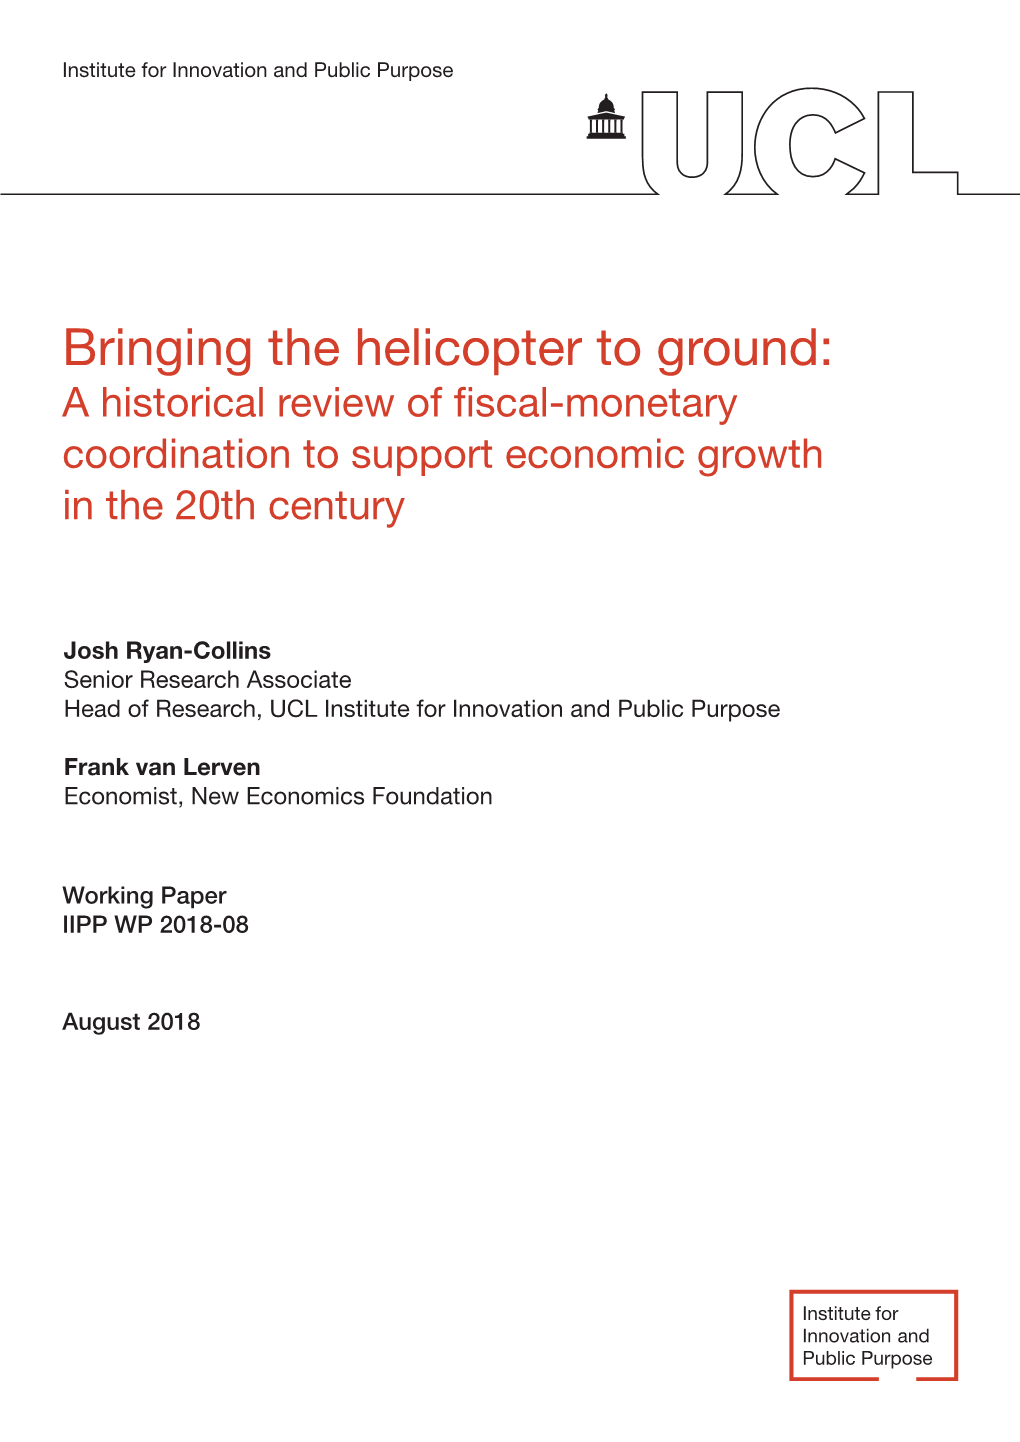 Bringing the Helicopter to Ground: a Historical Review of Fiscal-Monetary Coordination to Support Economic Growth in the 20Th Century